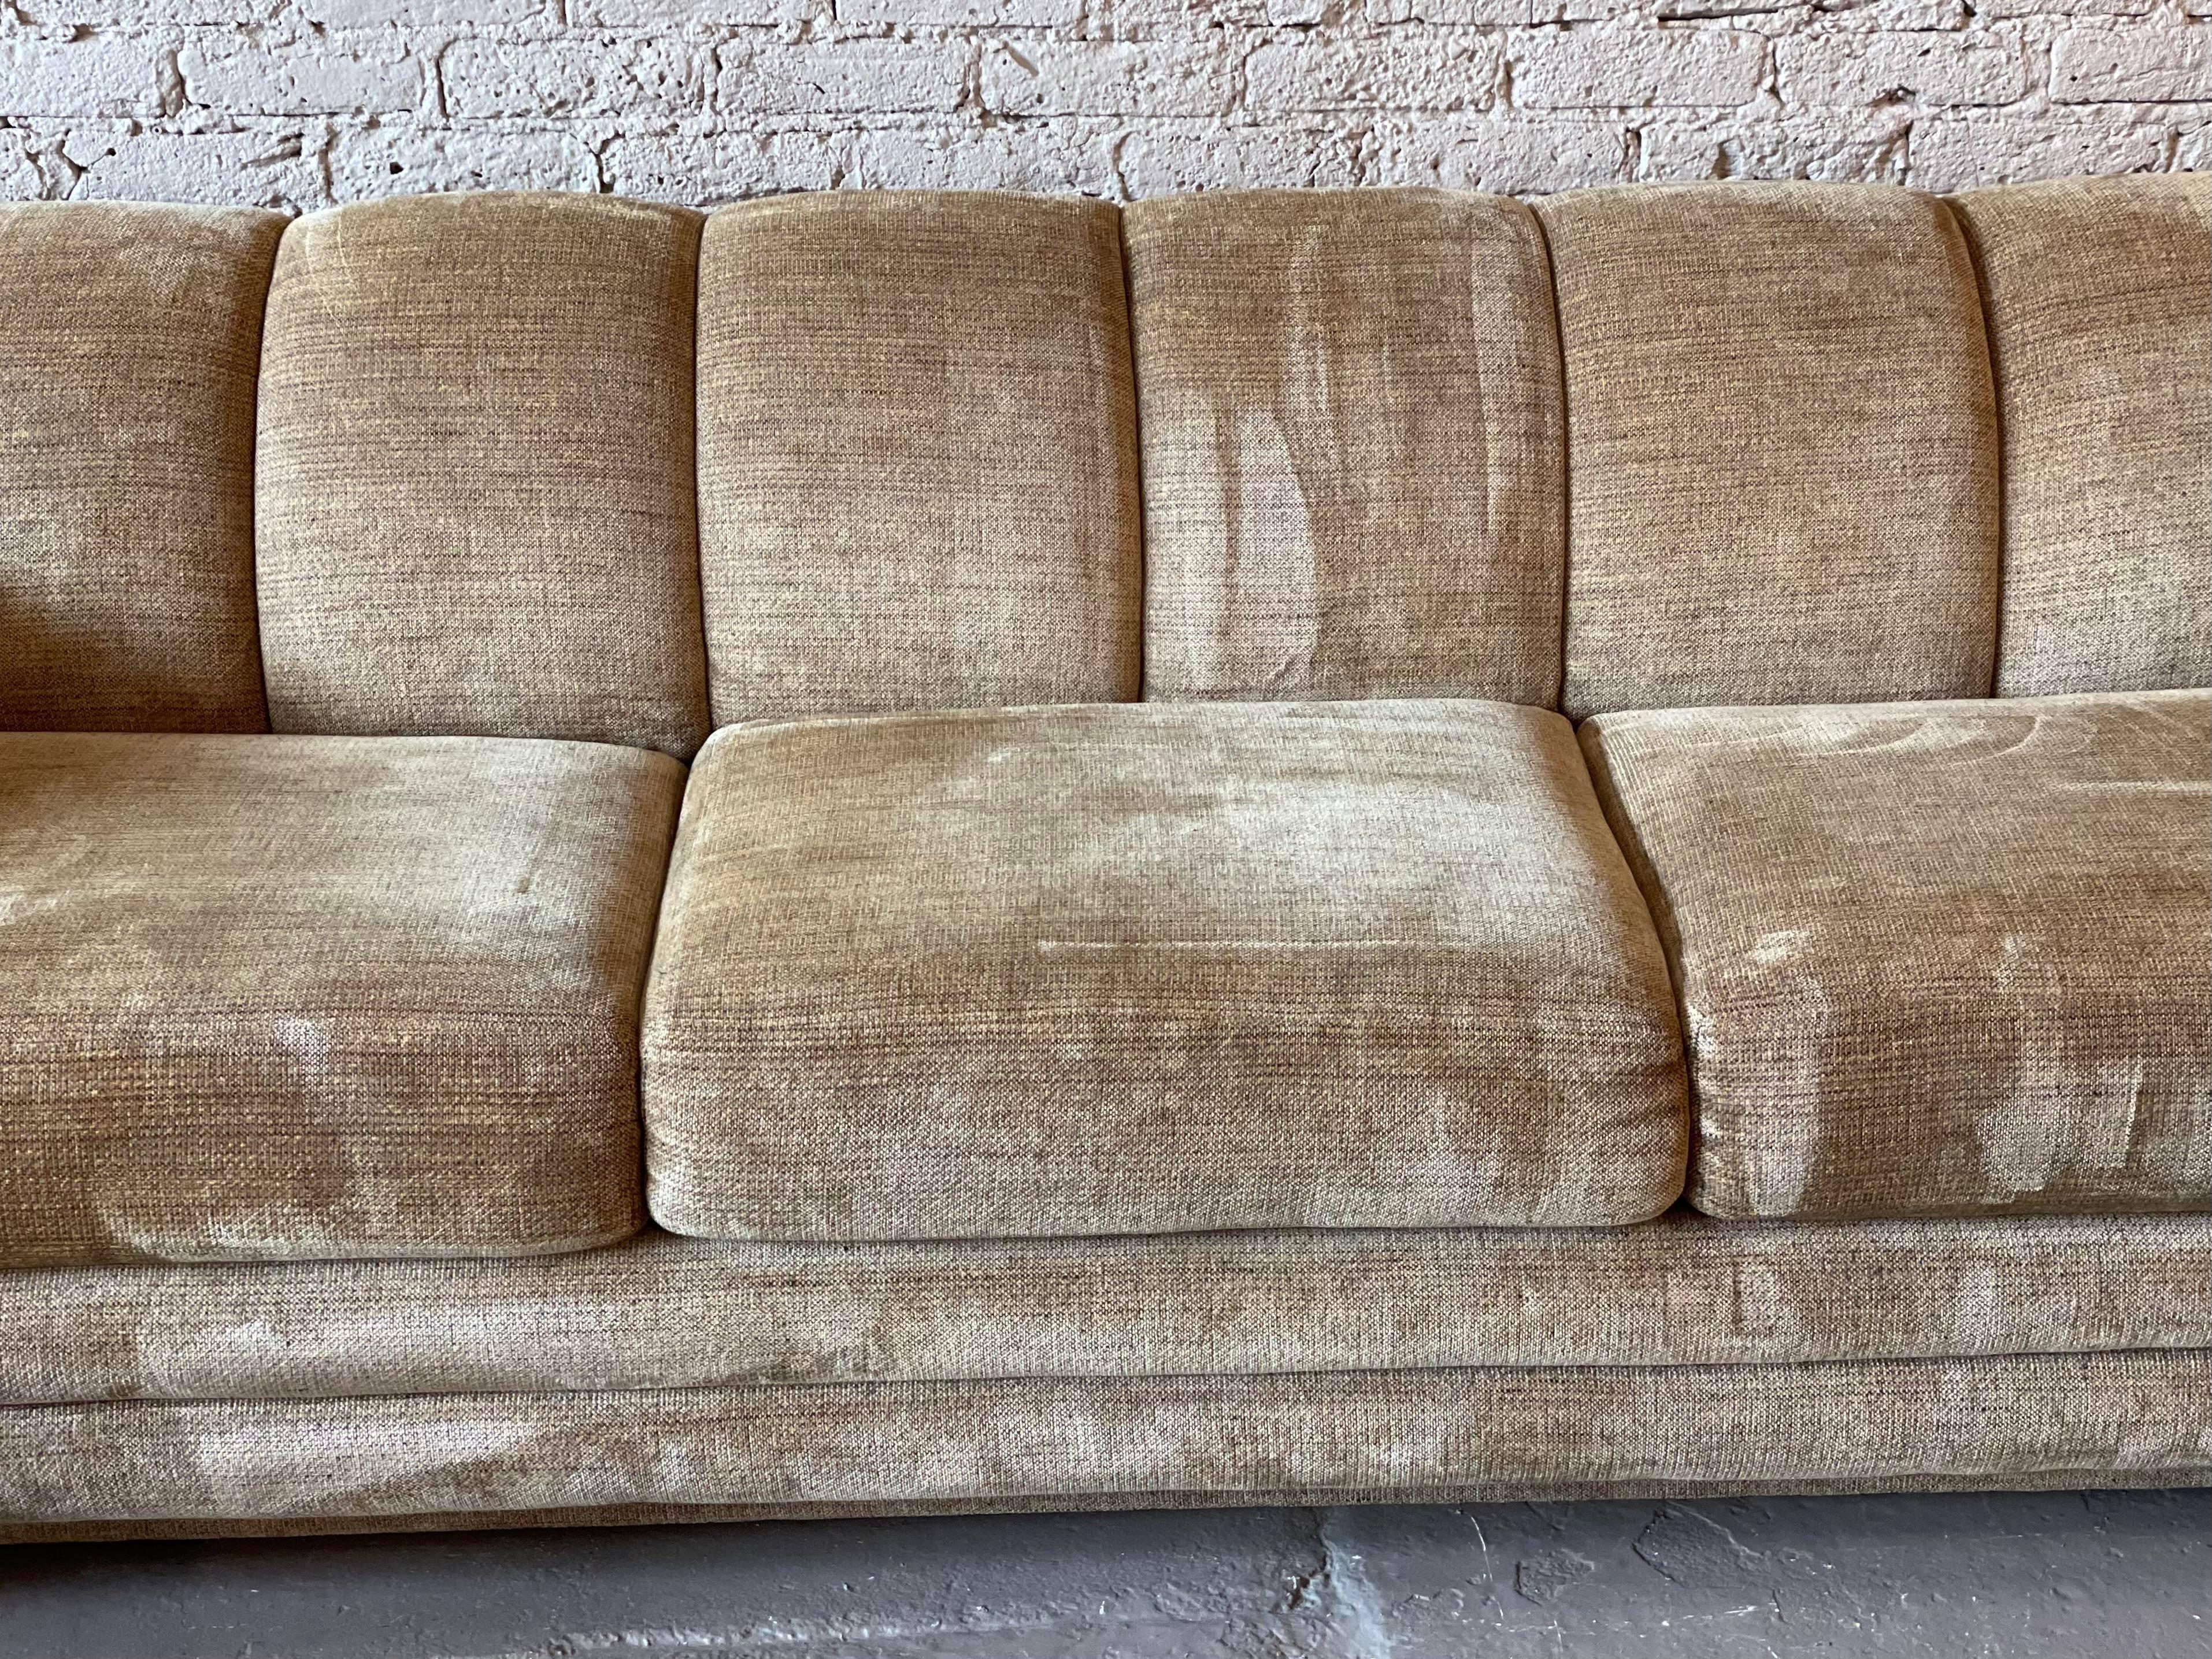 I bought this sofa because I loved the shape. Only to discover it’s made by directional with original tags still on. It’s so comfy. Cushions and fabric are in excellent condition.

Dimensions: 94